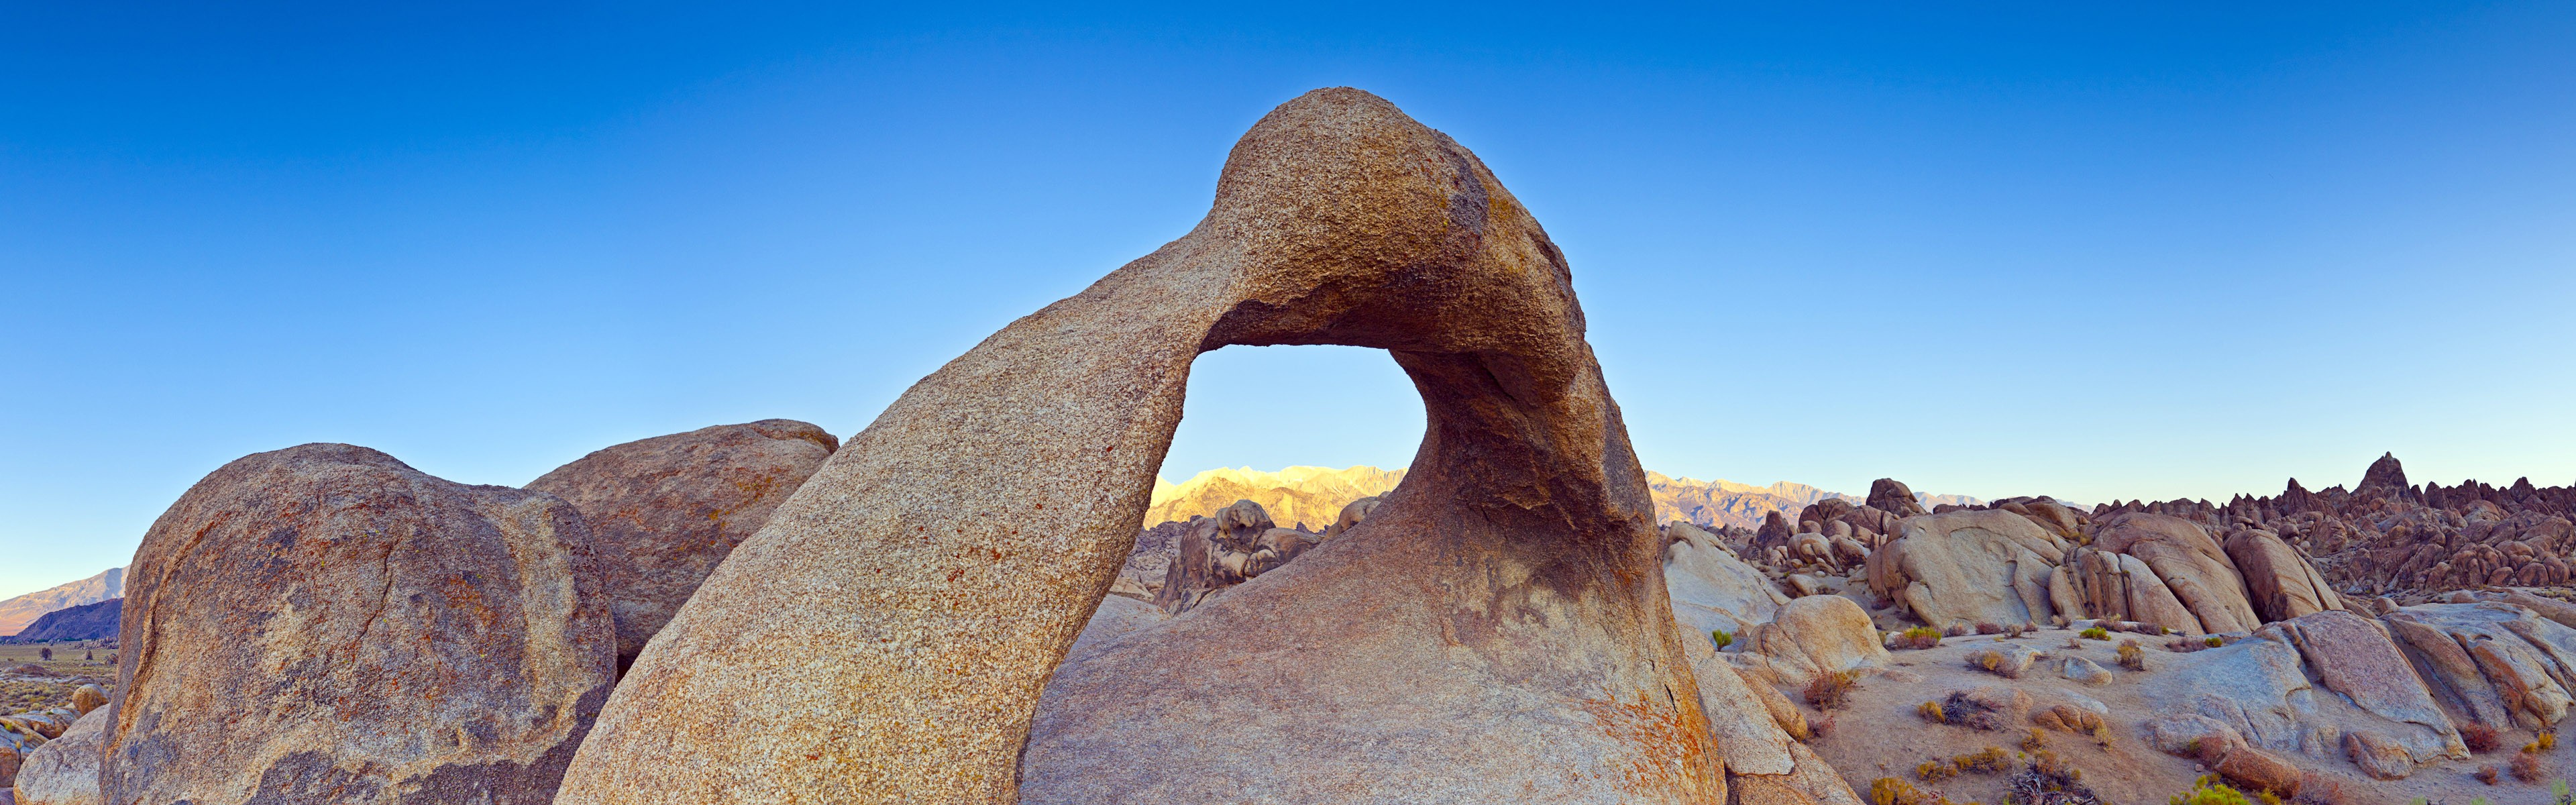 deserts, Arches, Rock, Formations, Panoramic Wallpaper